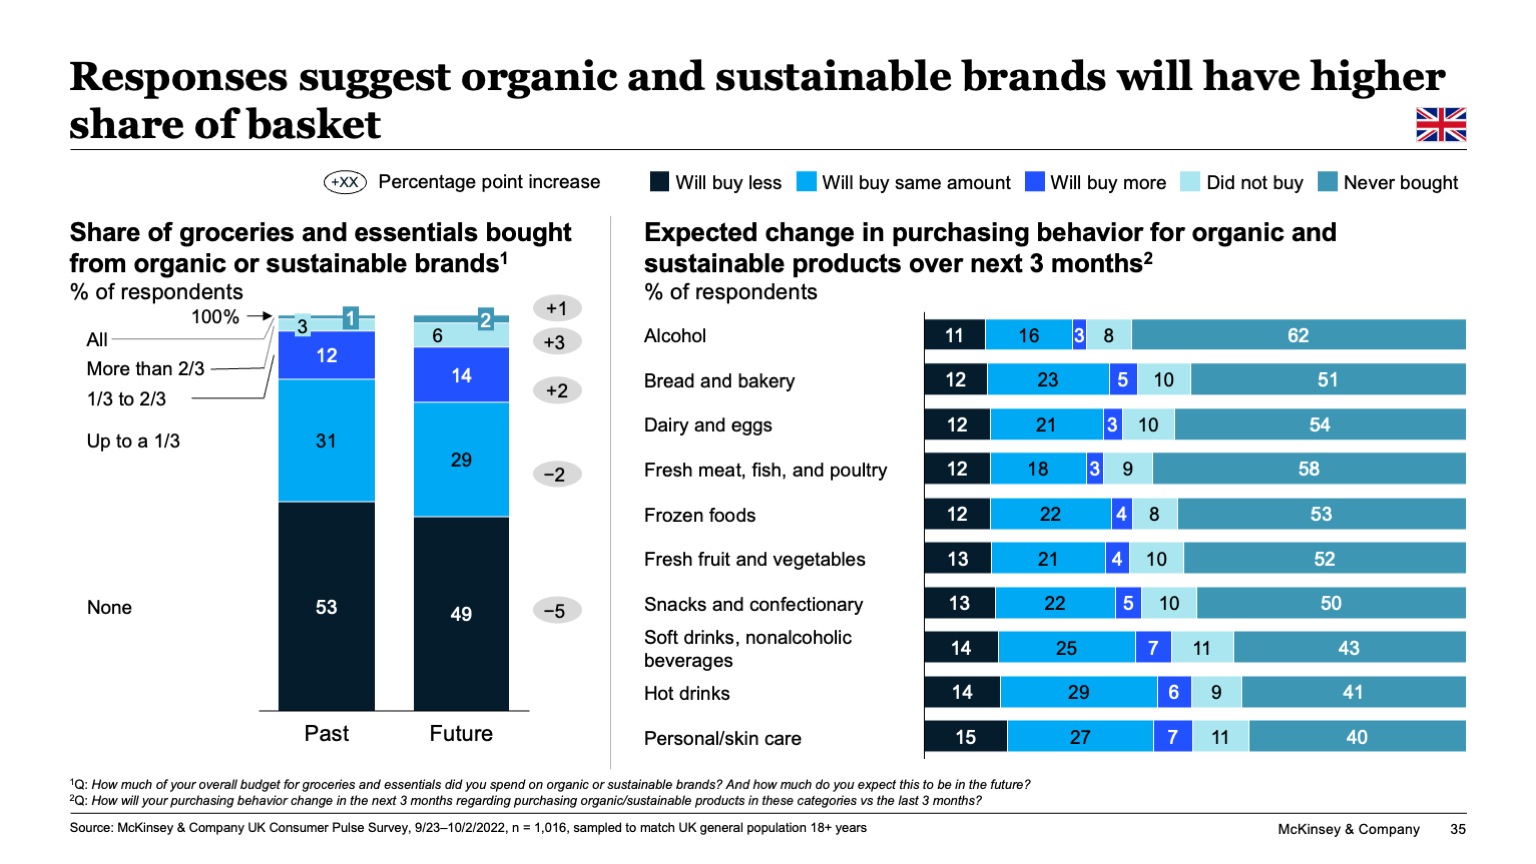 Responses suggest organic and sustainable brands will have higher share of basket